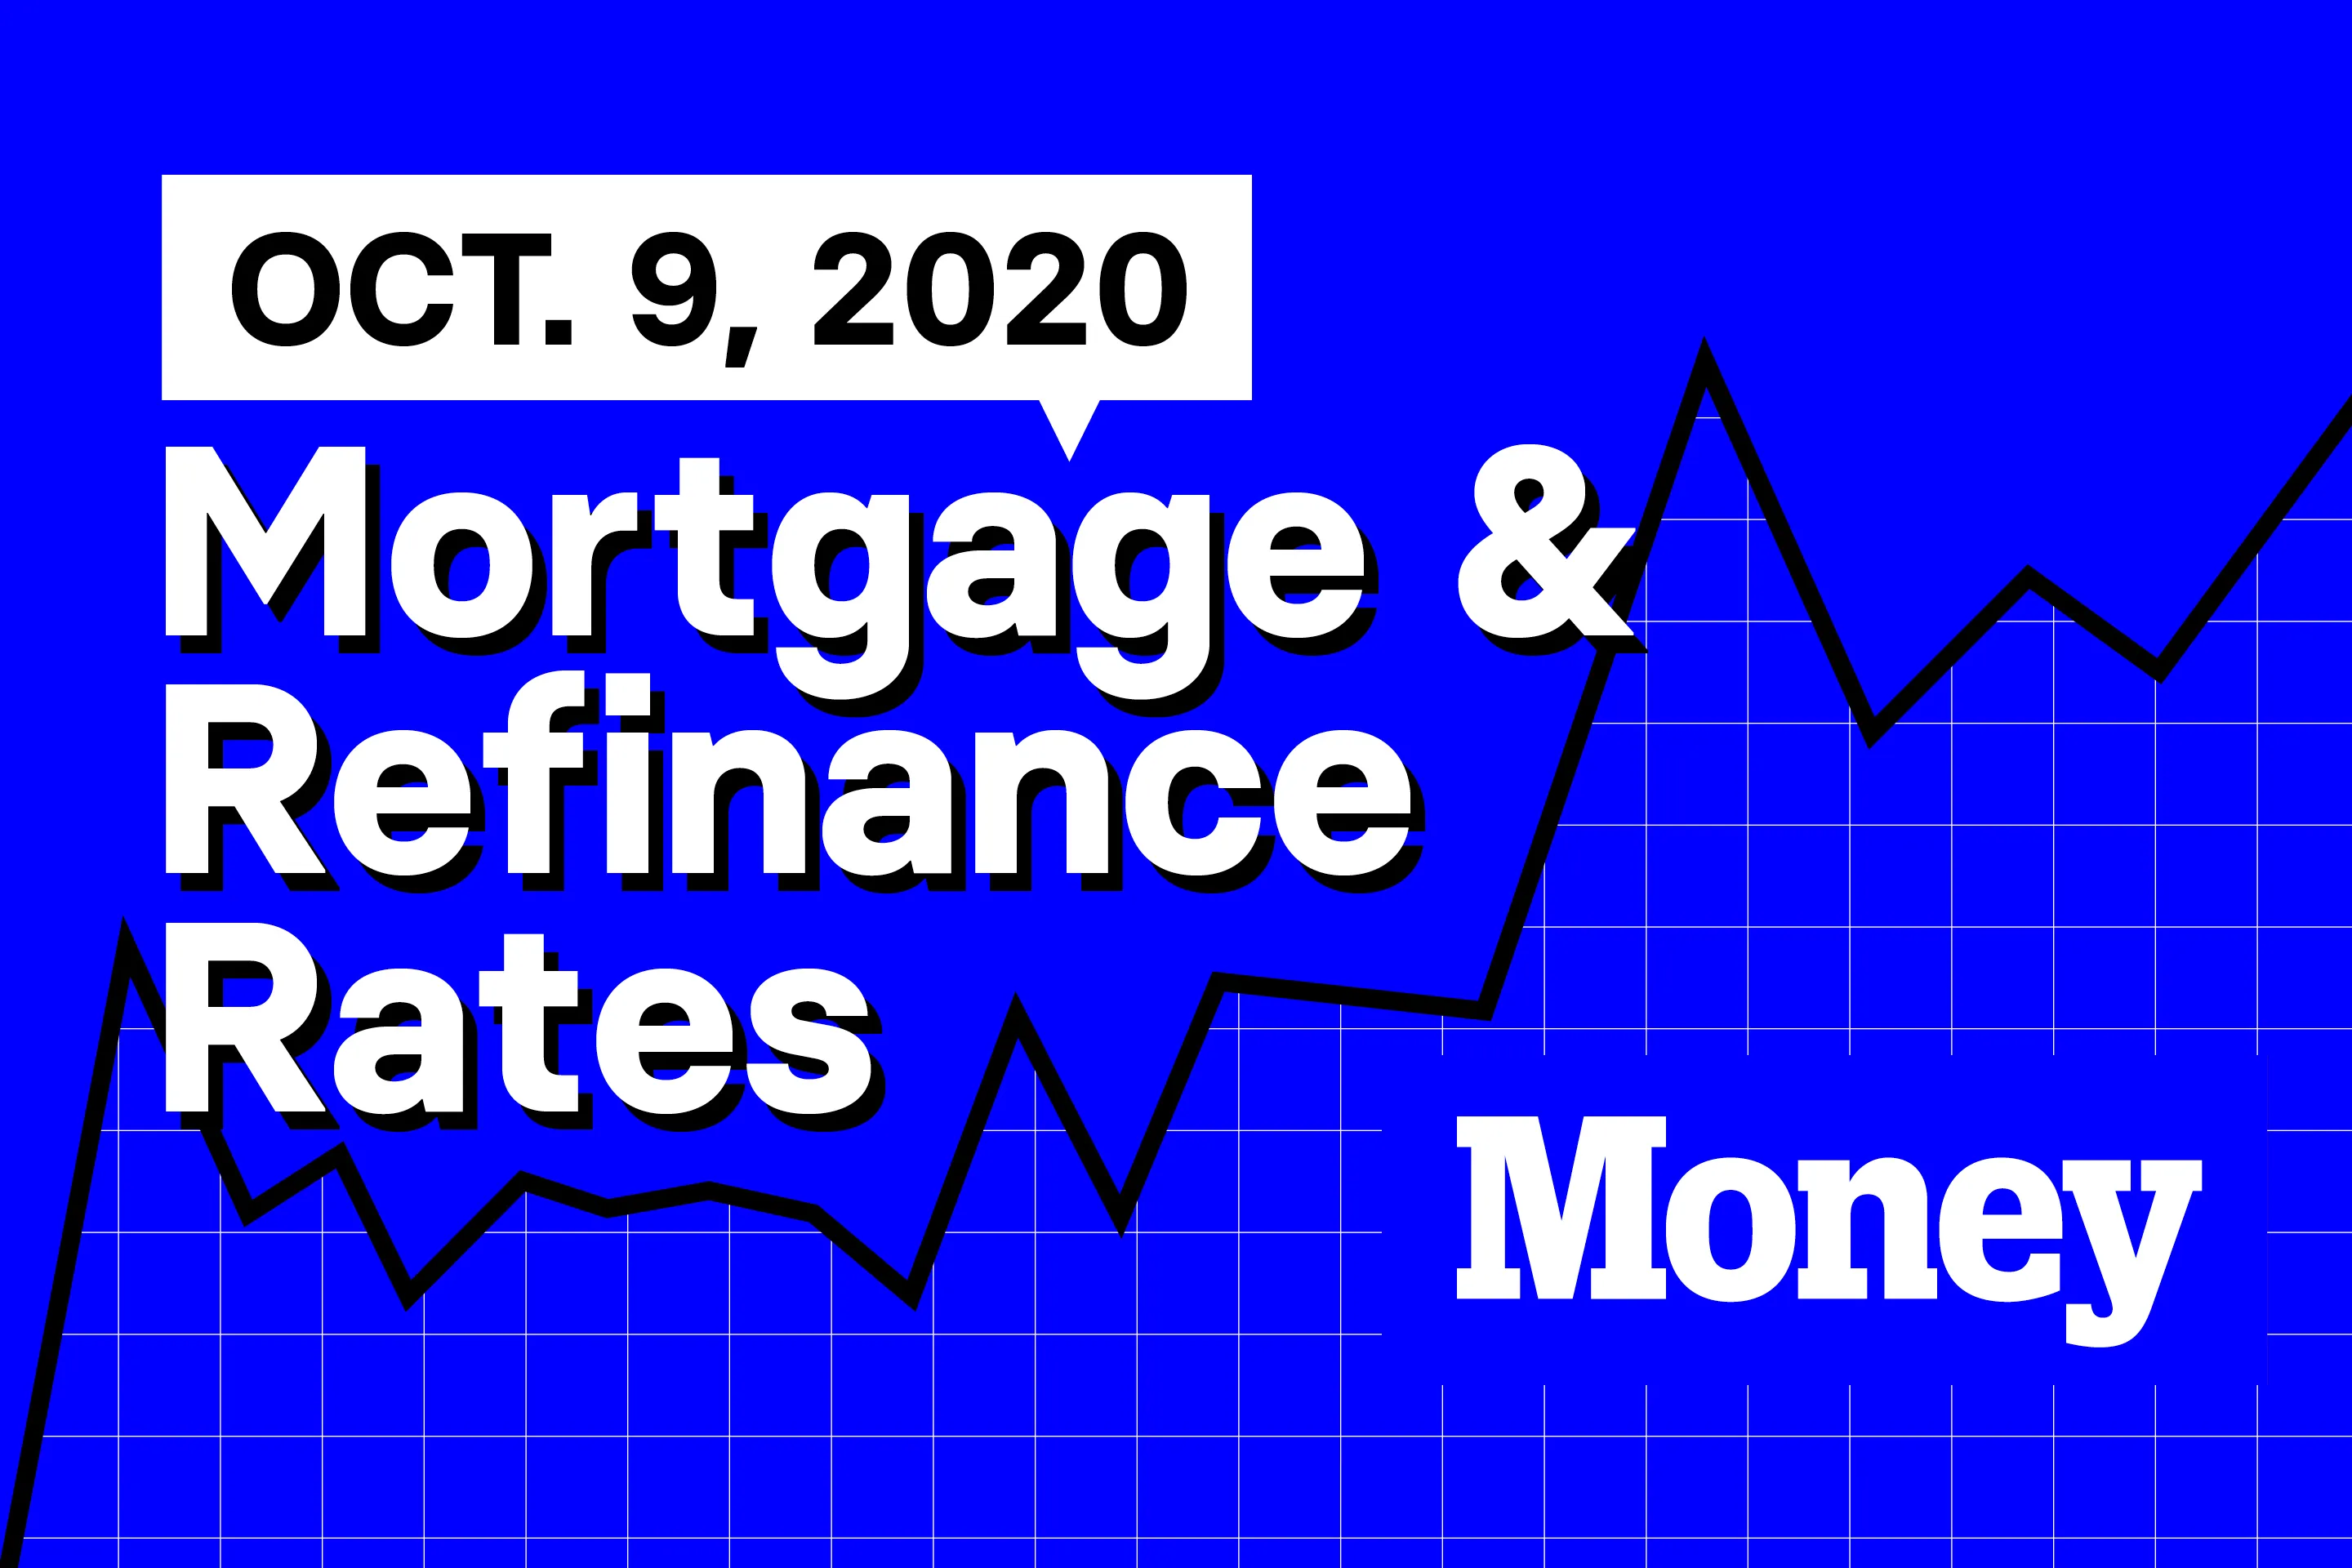 Here Are Today's Best Mortgage & Refinance Rates for October 9, 2020